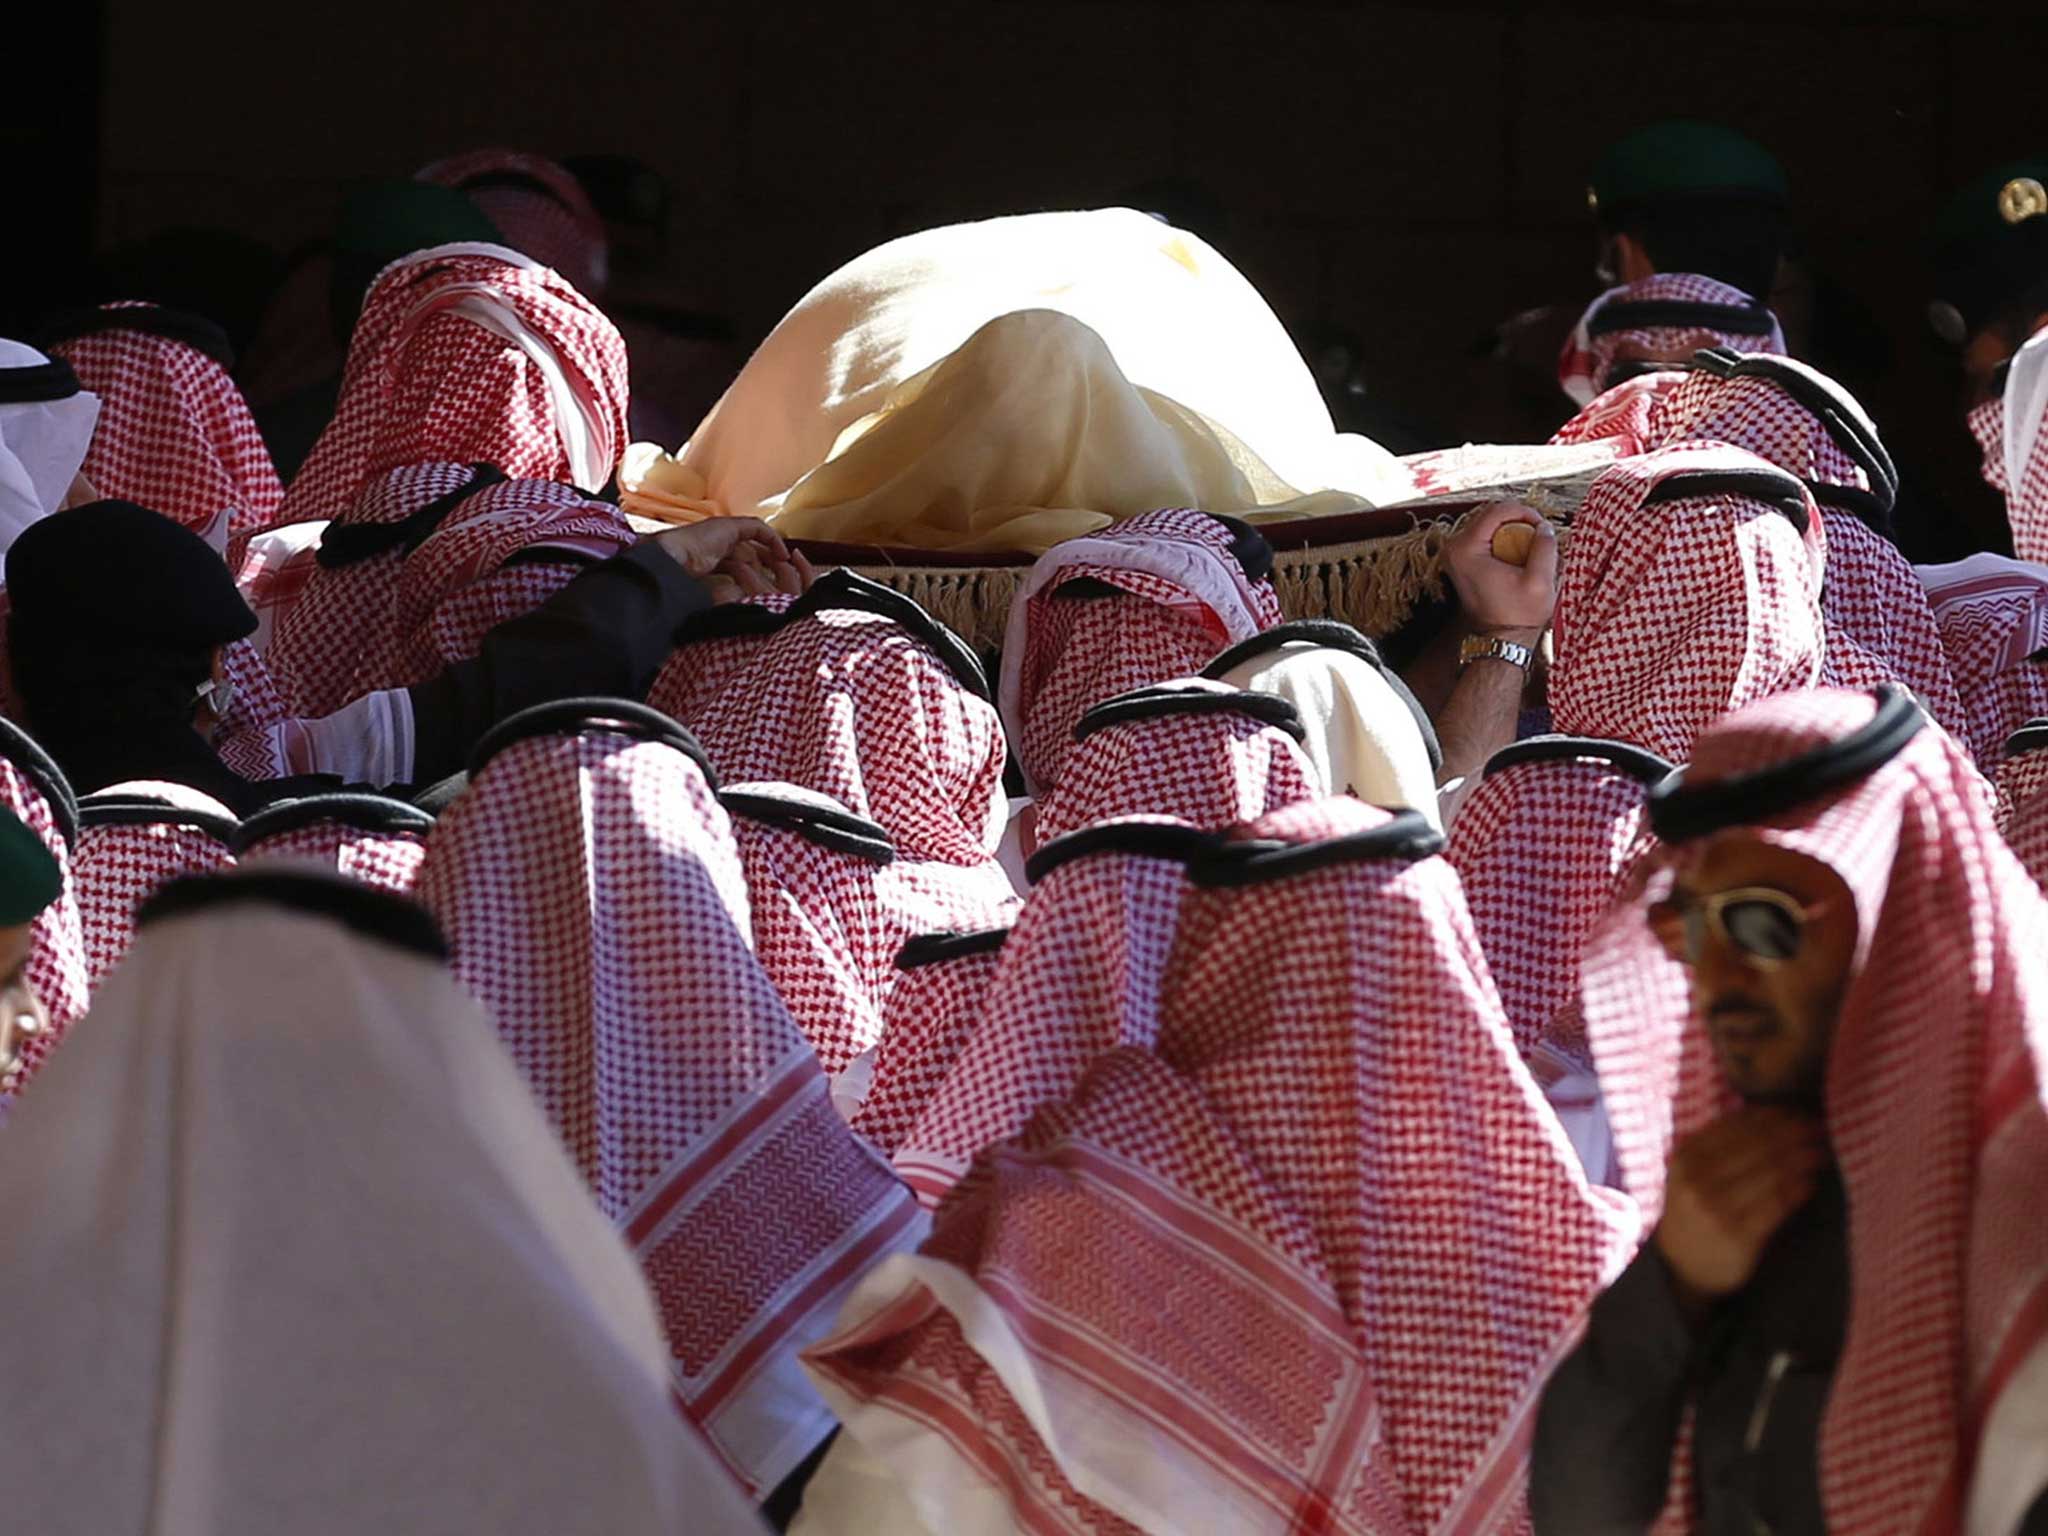 Mourners carry the body of the former king of the Kingdom of Saudi Arabia